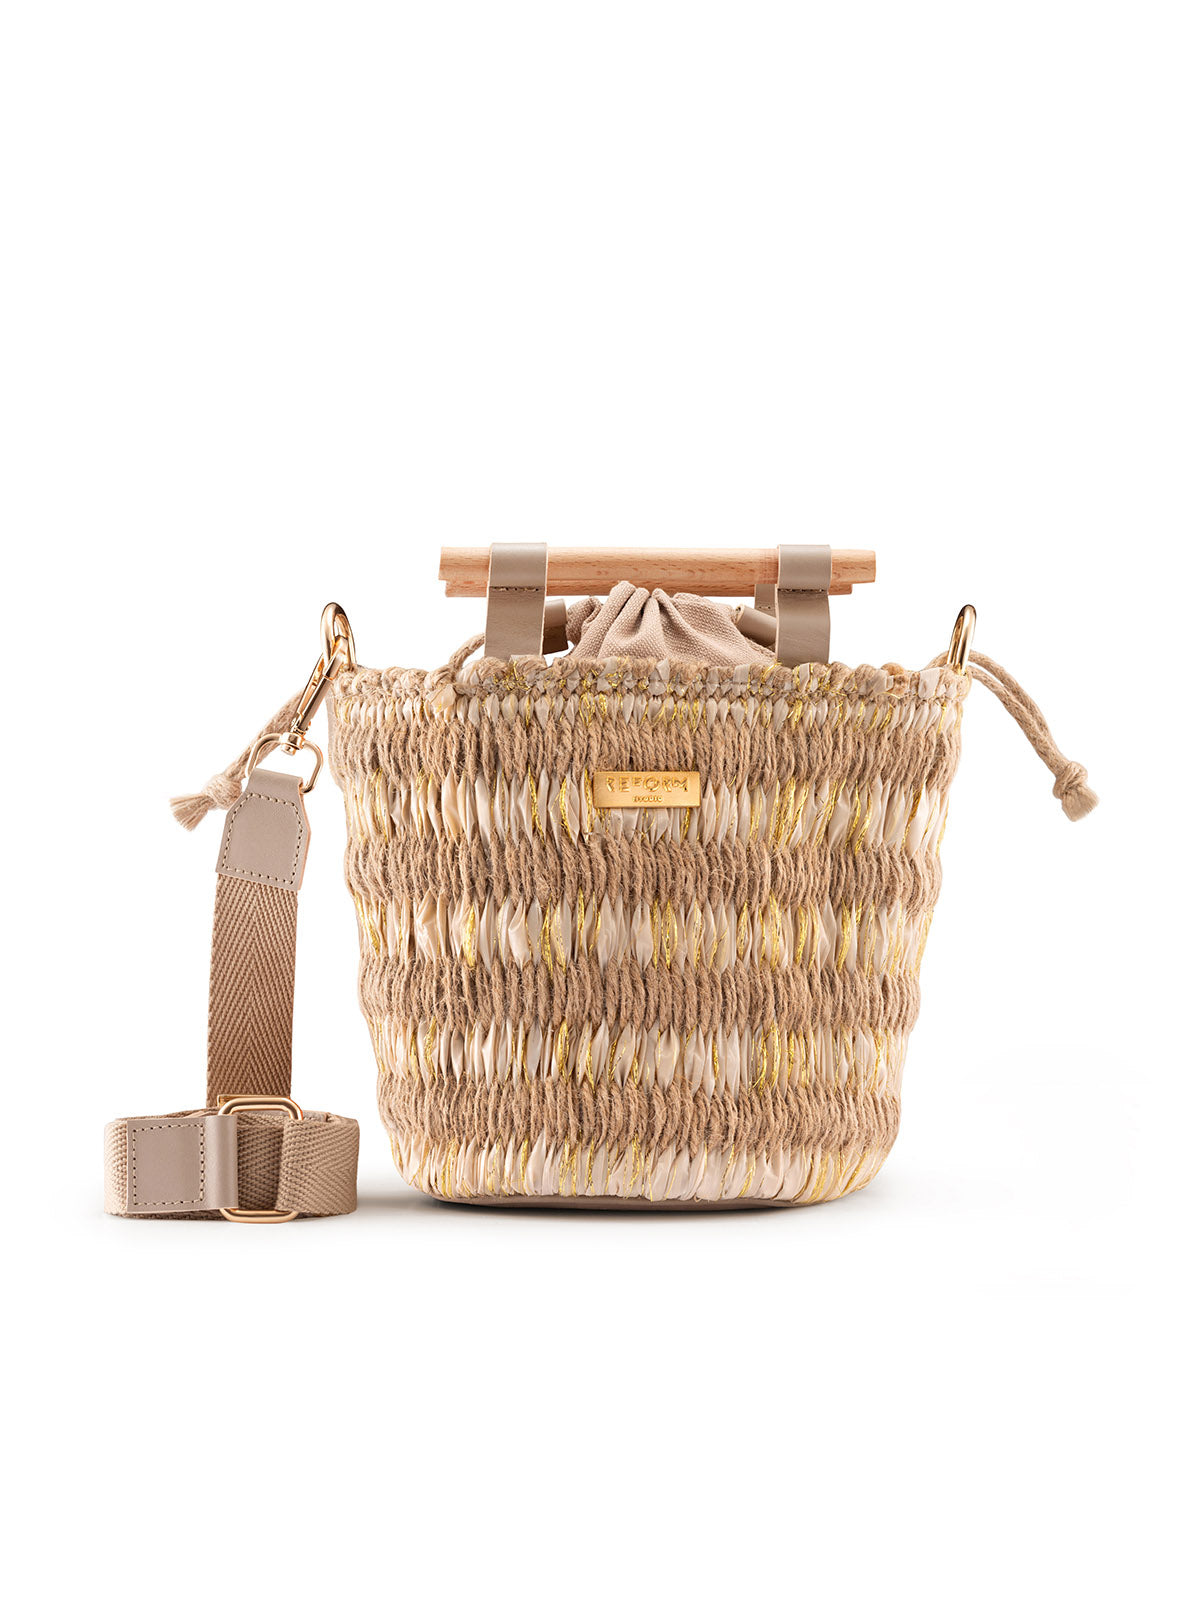 Mini Afro Basket in Beige and Gold